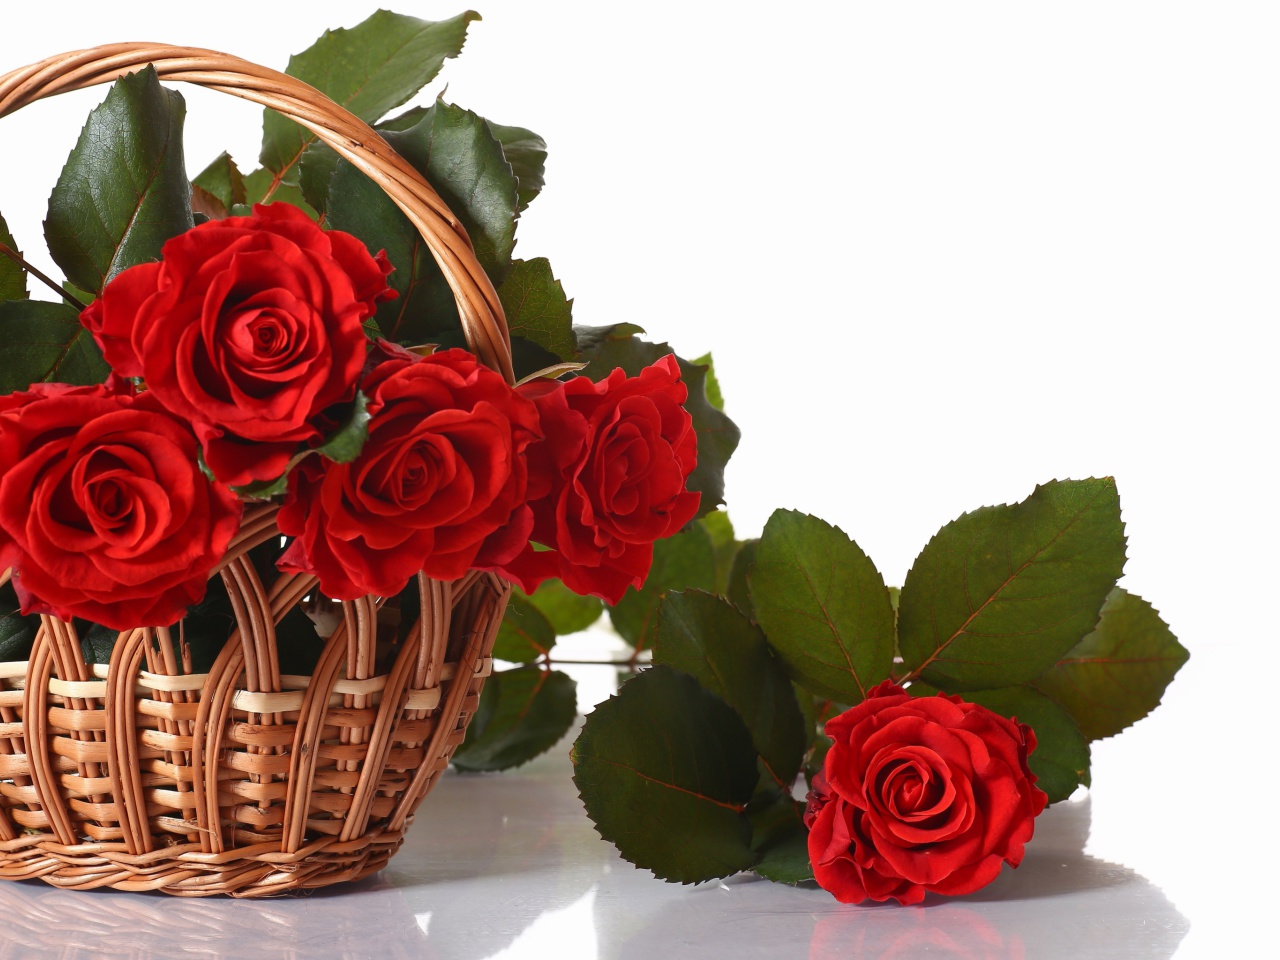 Basket with Roses wallpaper 1280x960